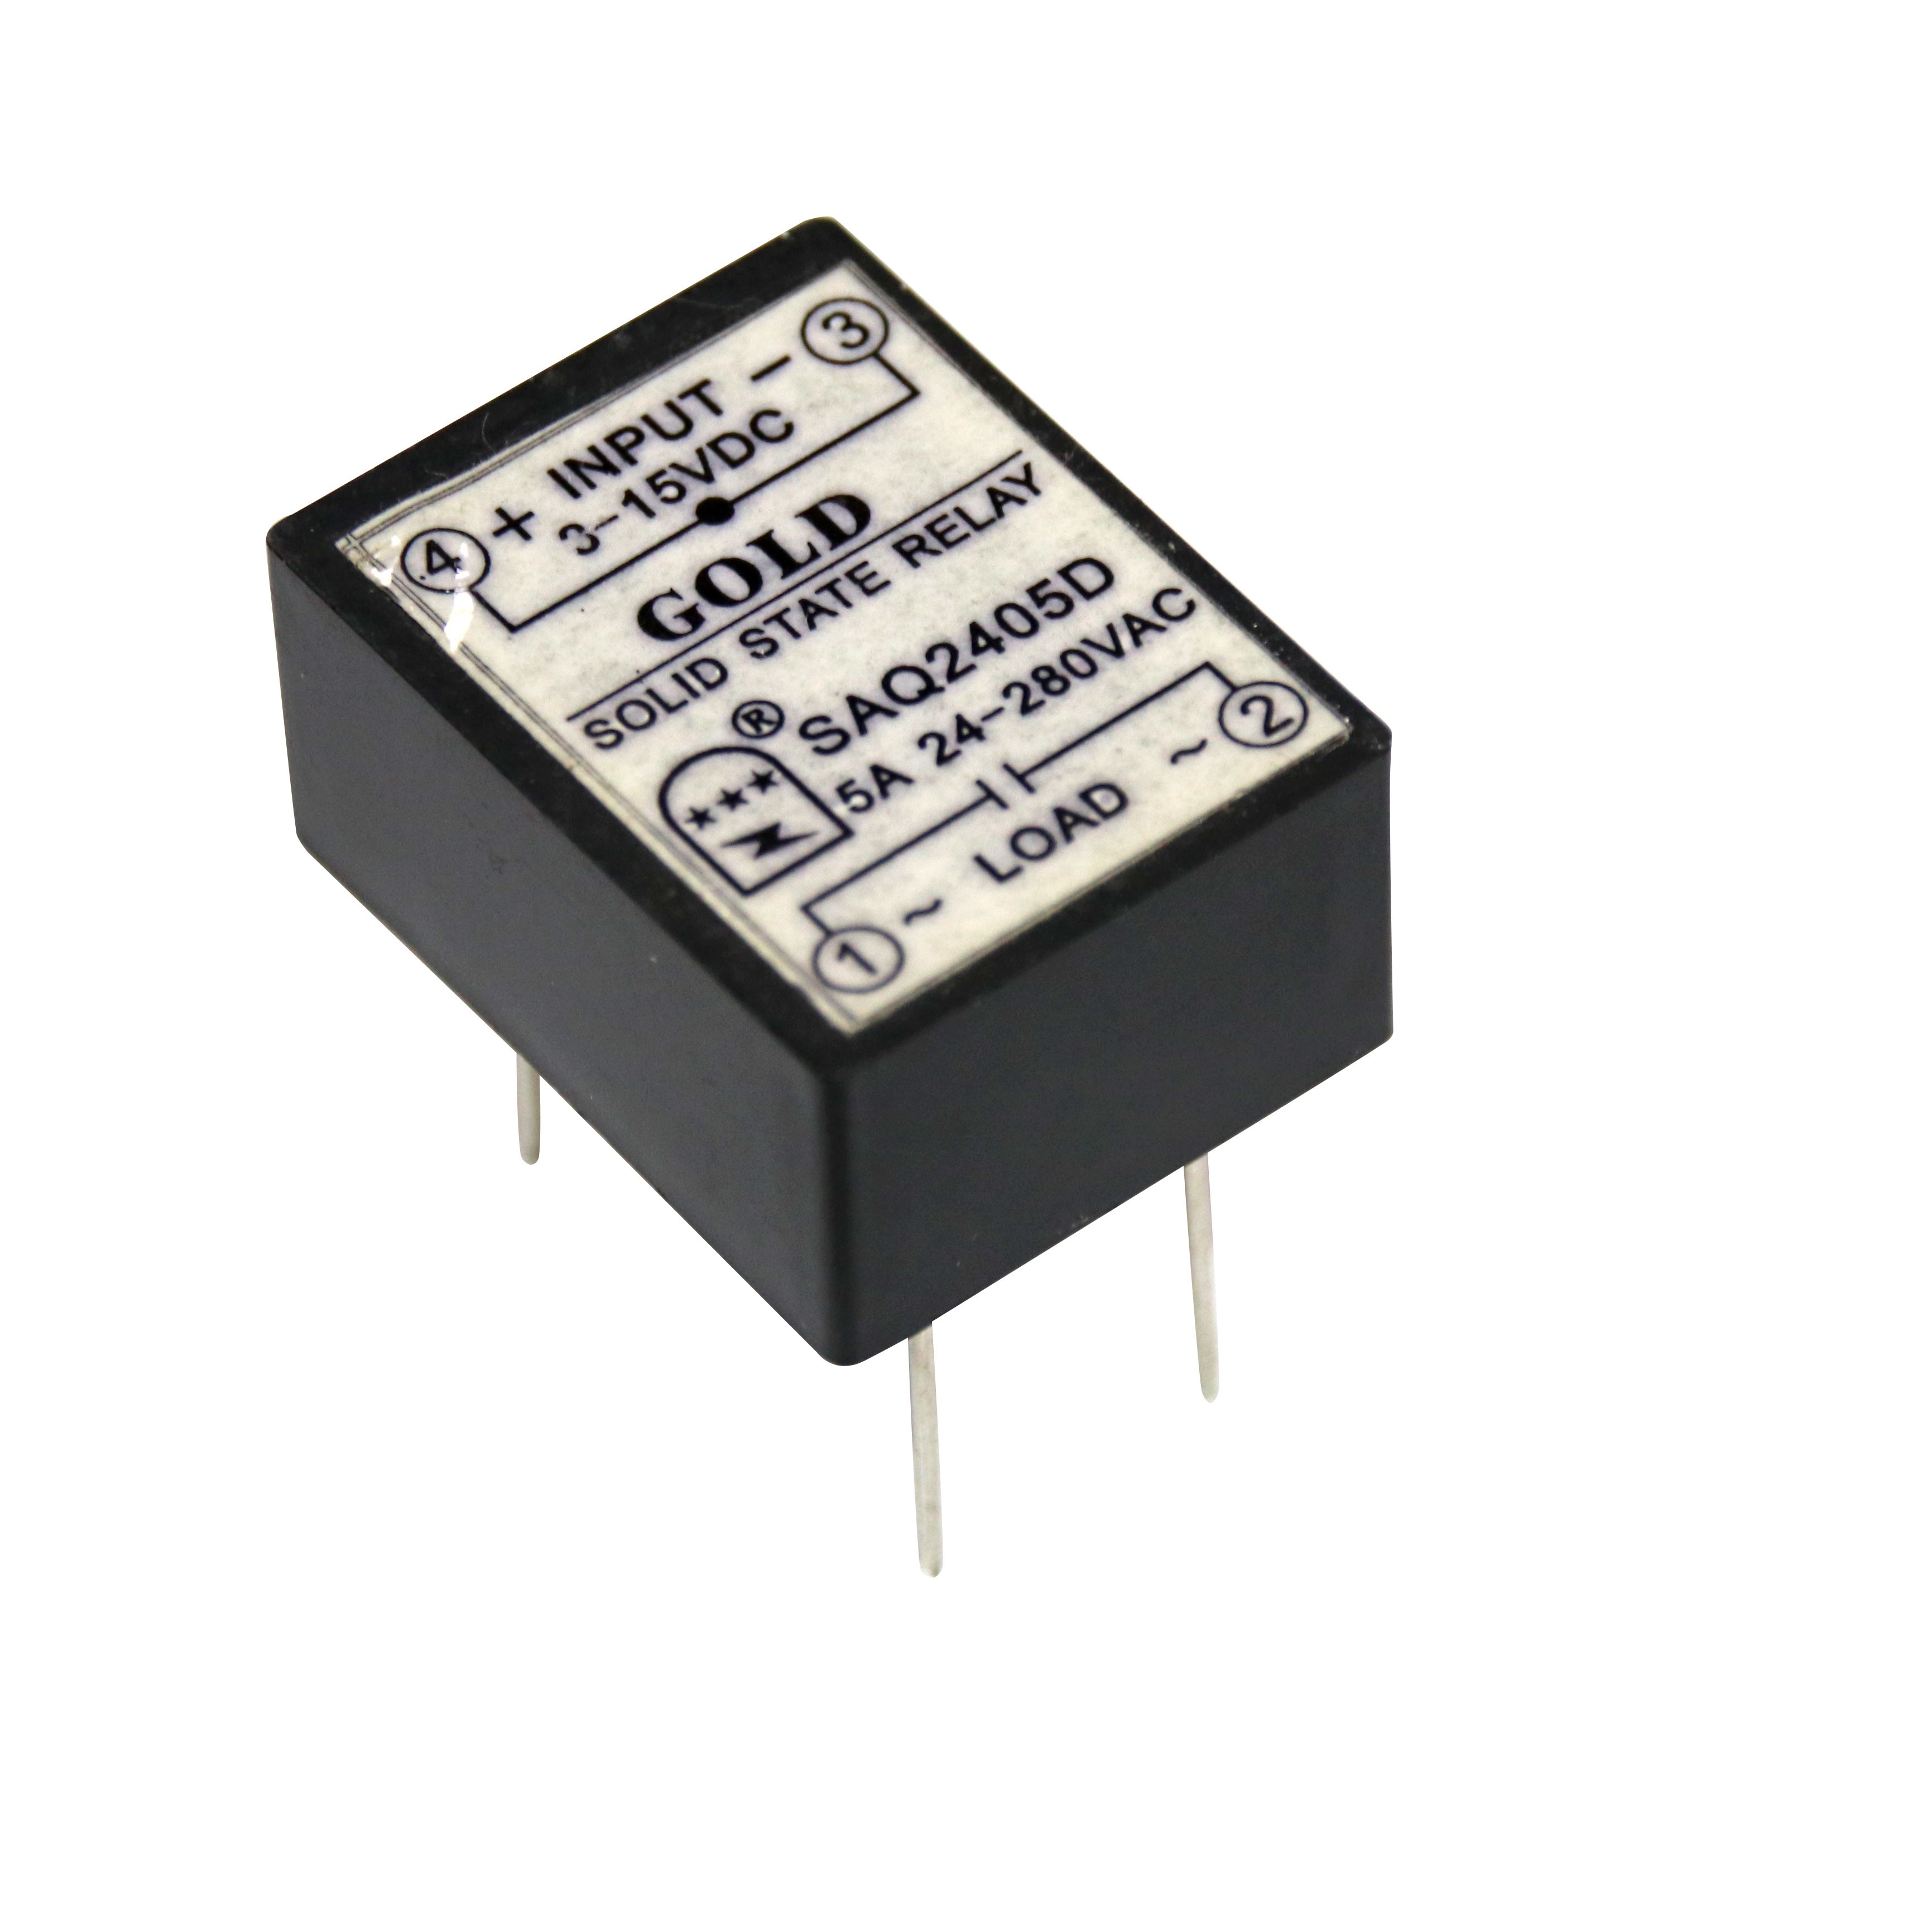 China Low Voltage Scr 3v 50 Amp SSR Solid State Relay wholesale